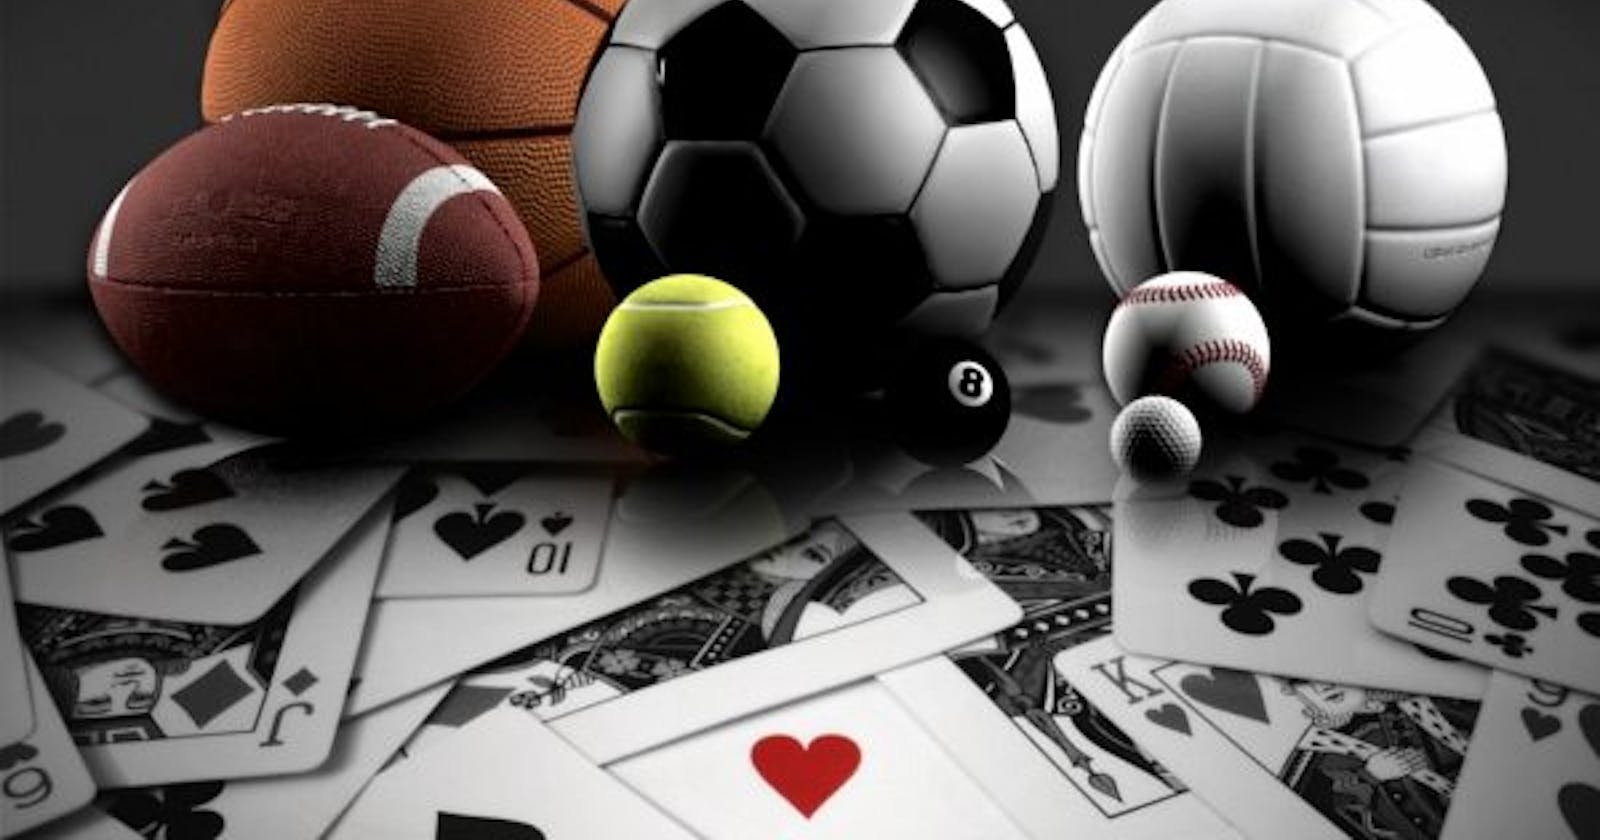 Get in the Game with Singapore Sports Betting